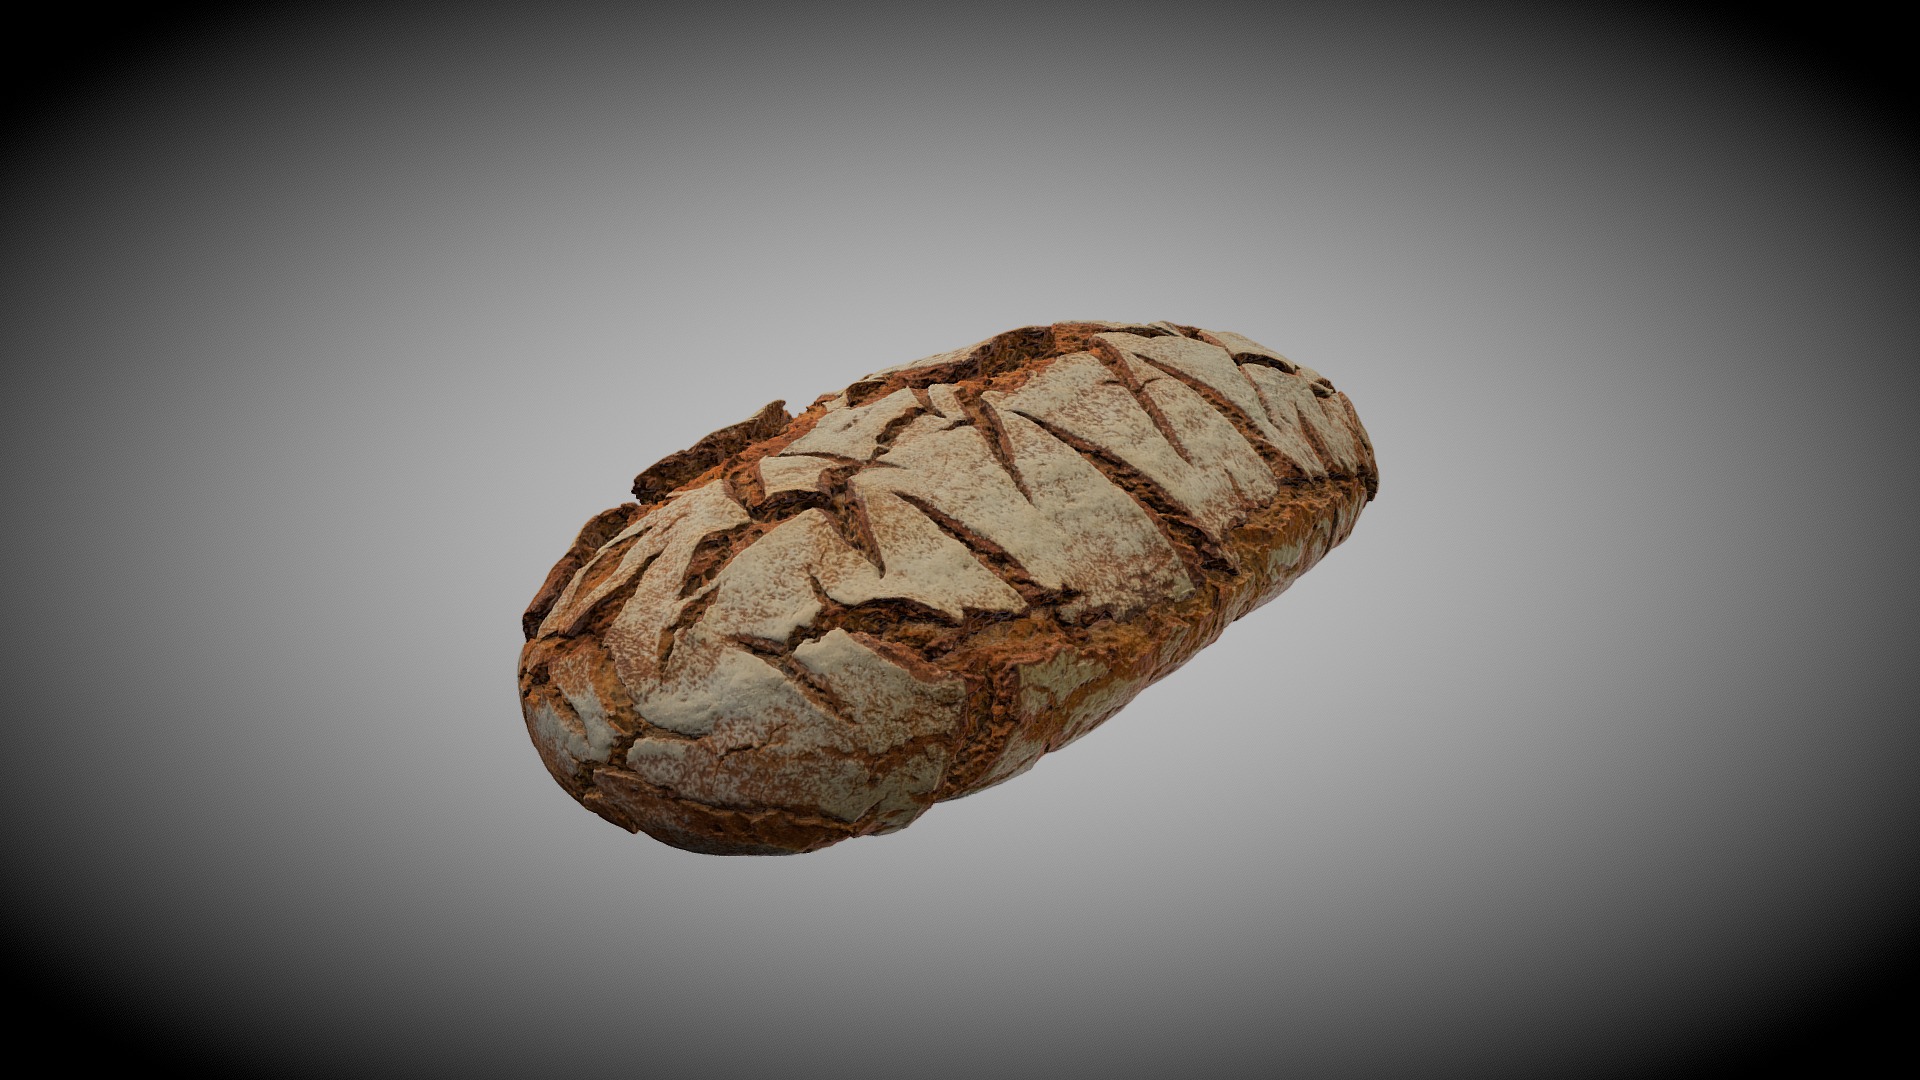 3D model Food in 3D – Bread_02 - This is a 3D model of the Food in 3D - Bread_02. The 3D model is about a brown and white mushroom.